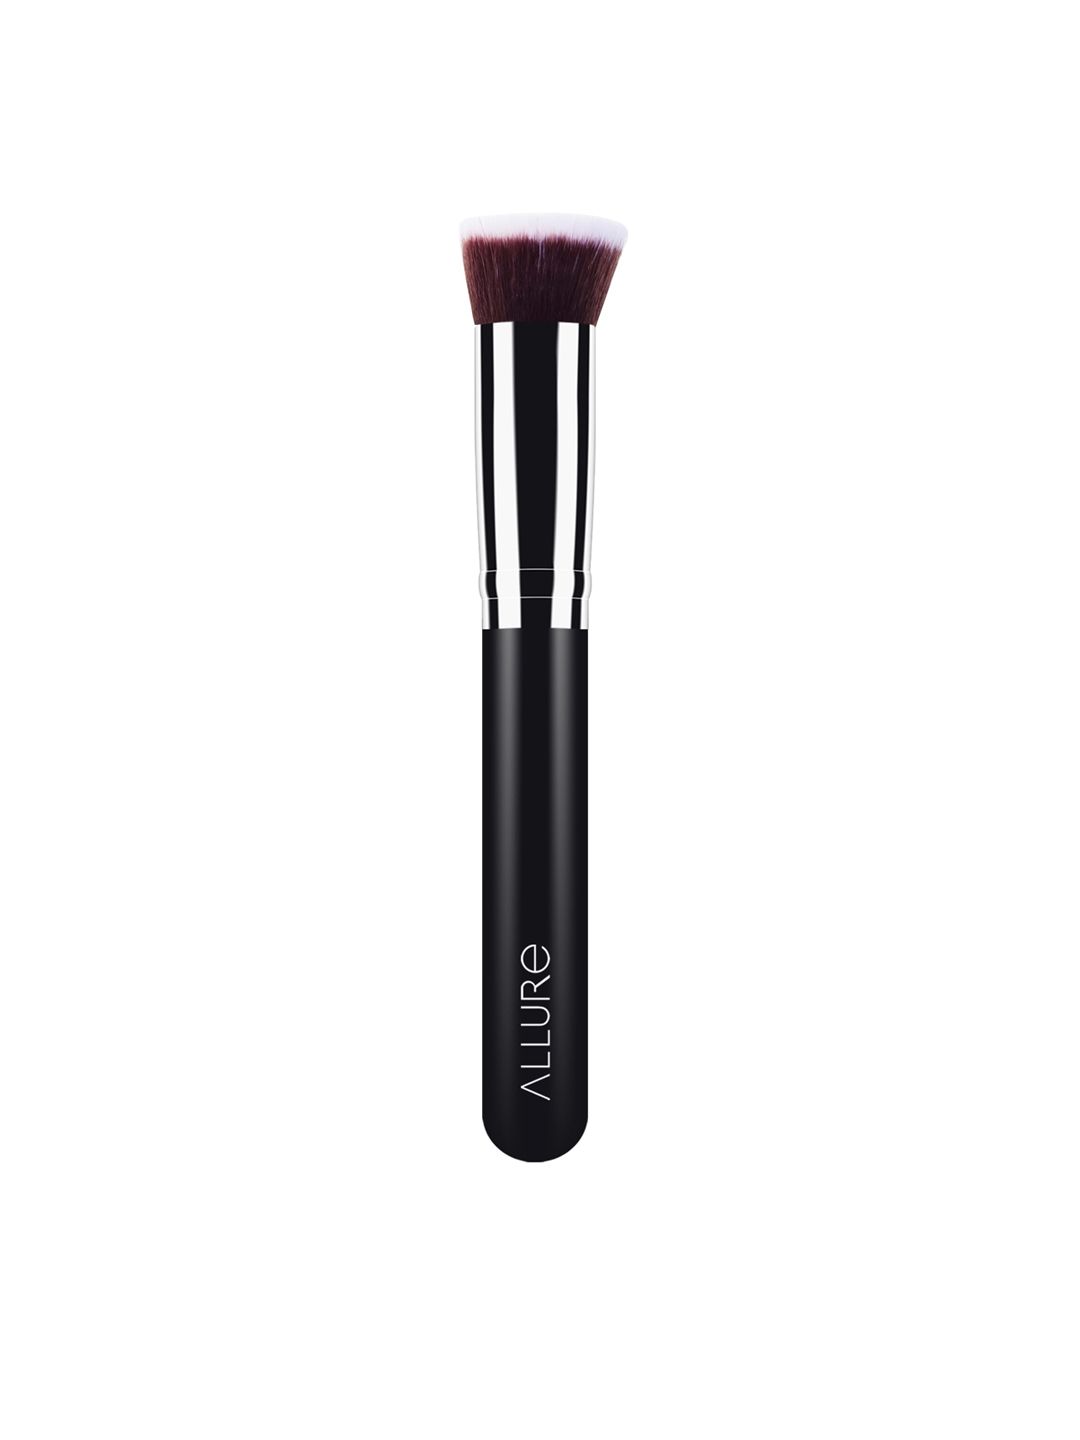 ALLURE Professional Foundation Makeup Brush SSK-102 Price in India